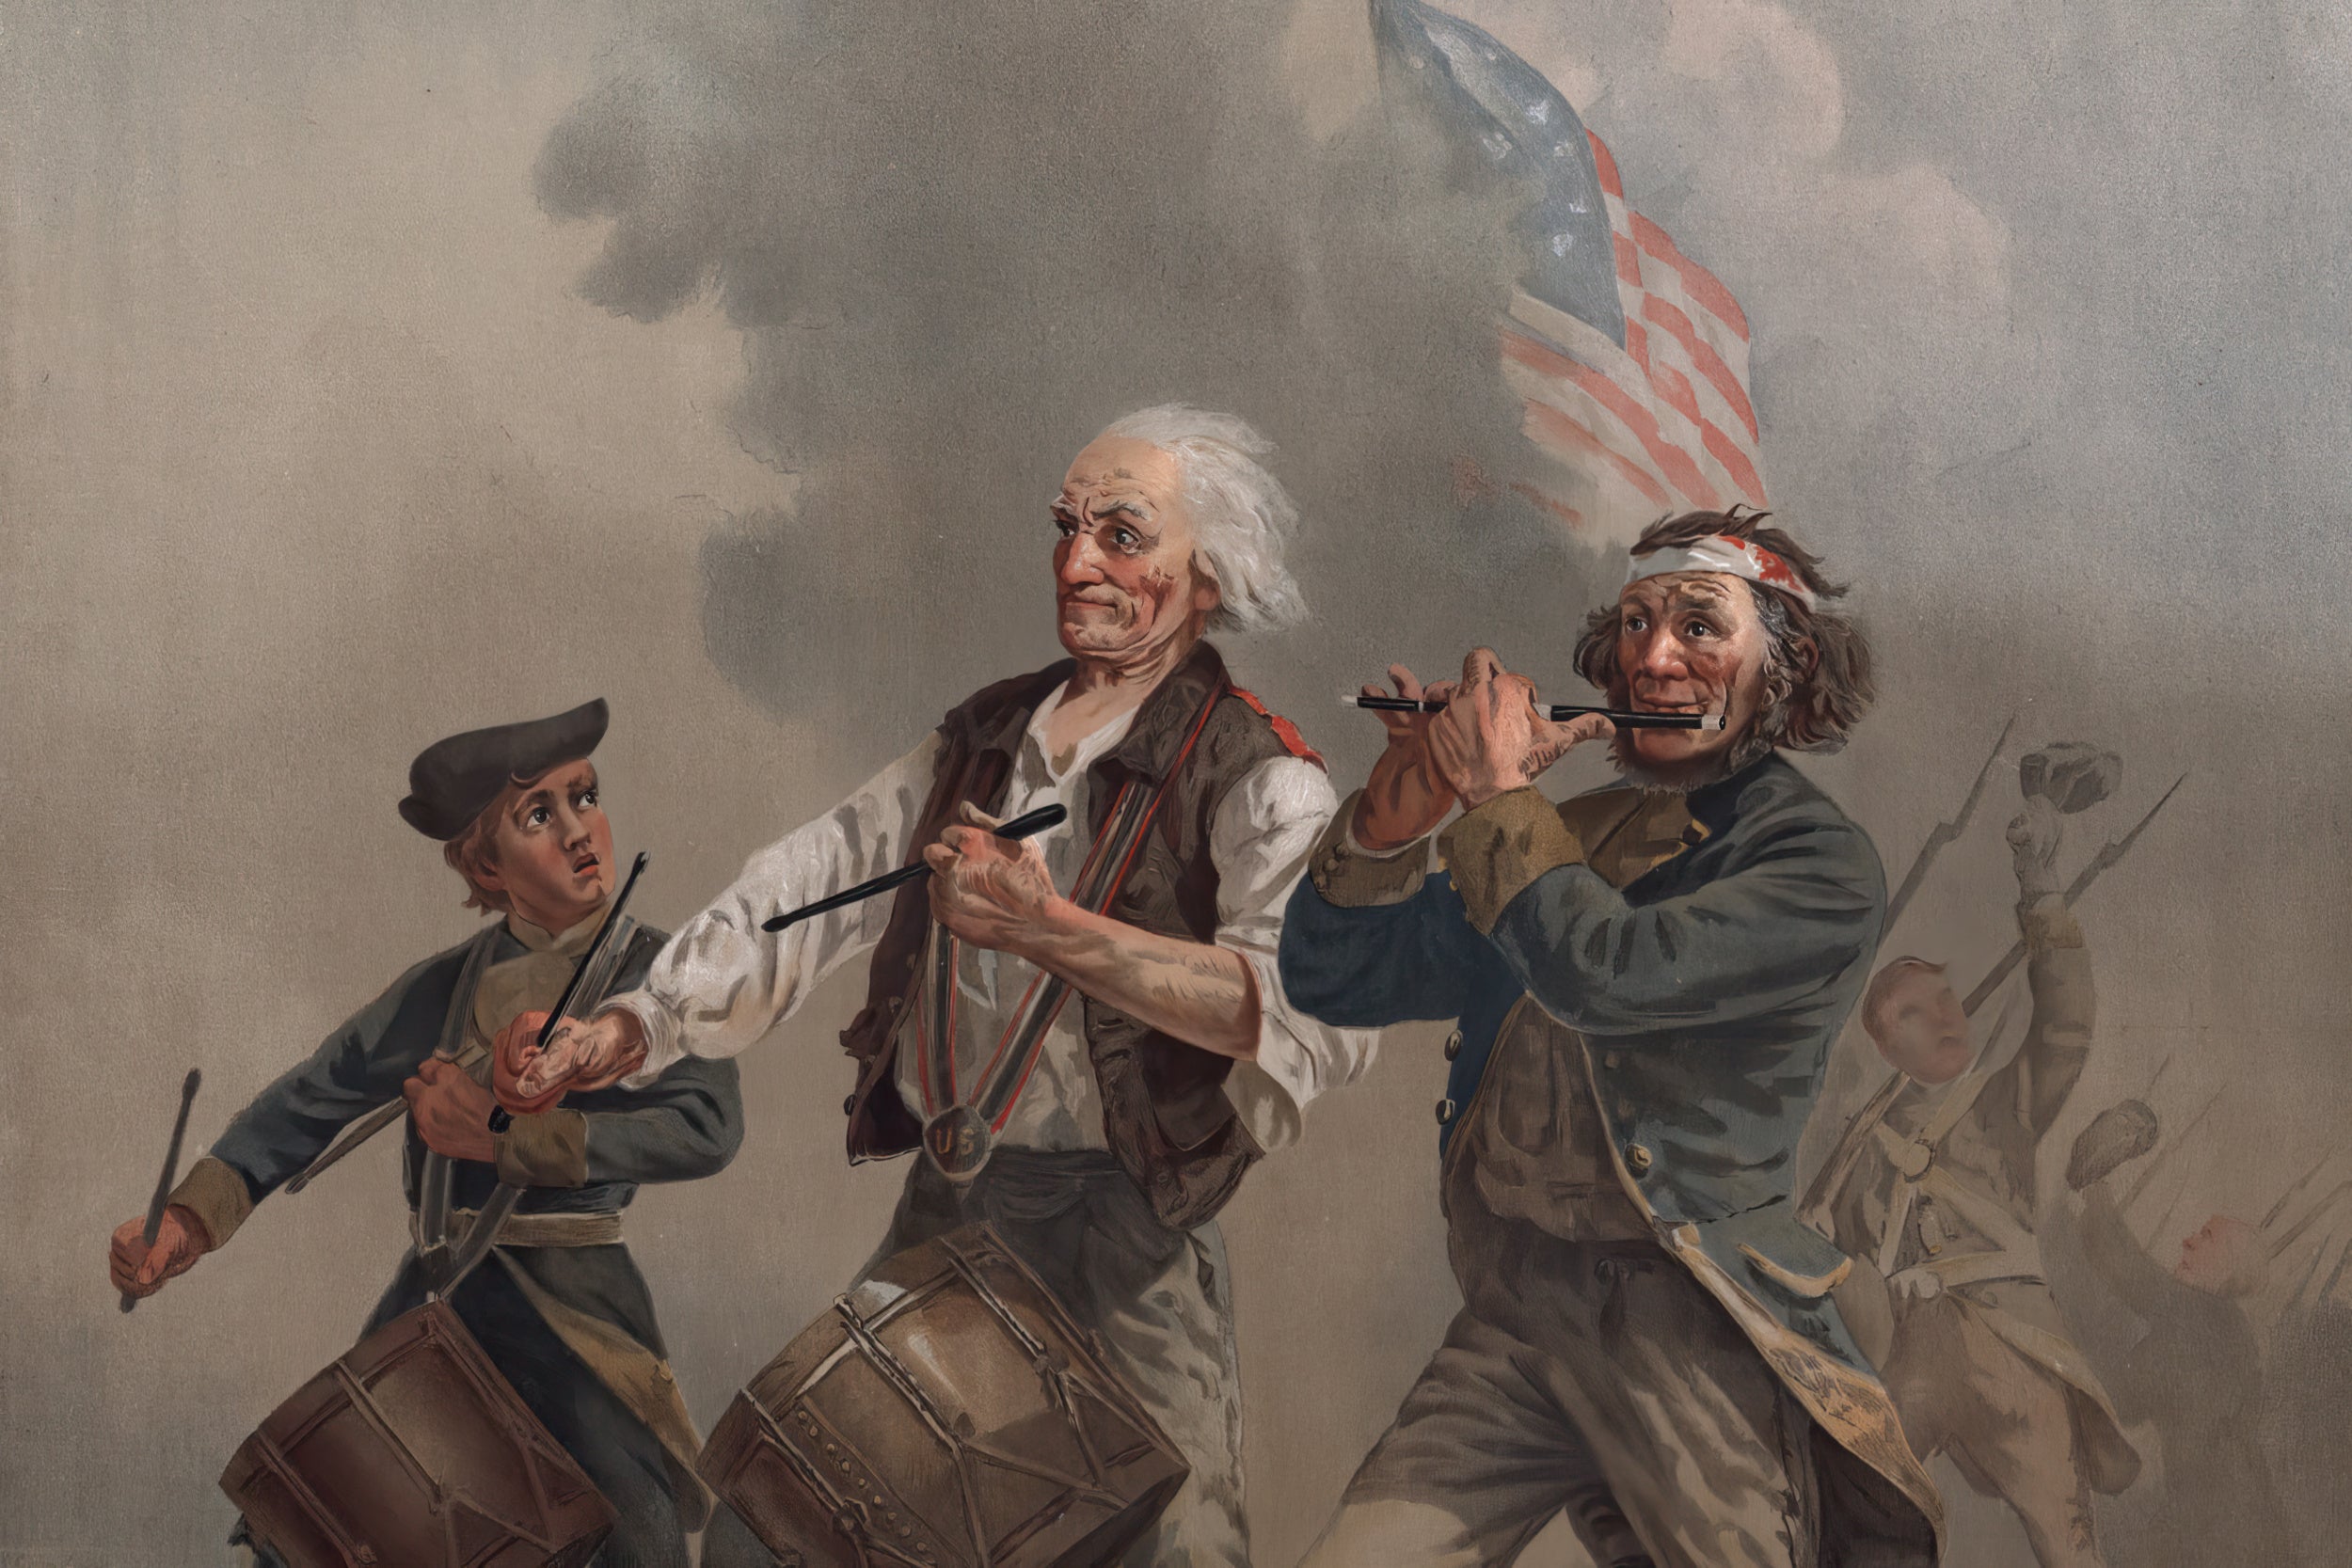 The Spirit of '76 - Yankee Doodle (Painting)